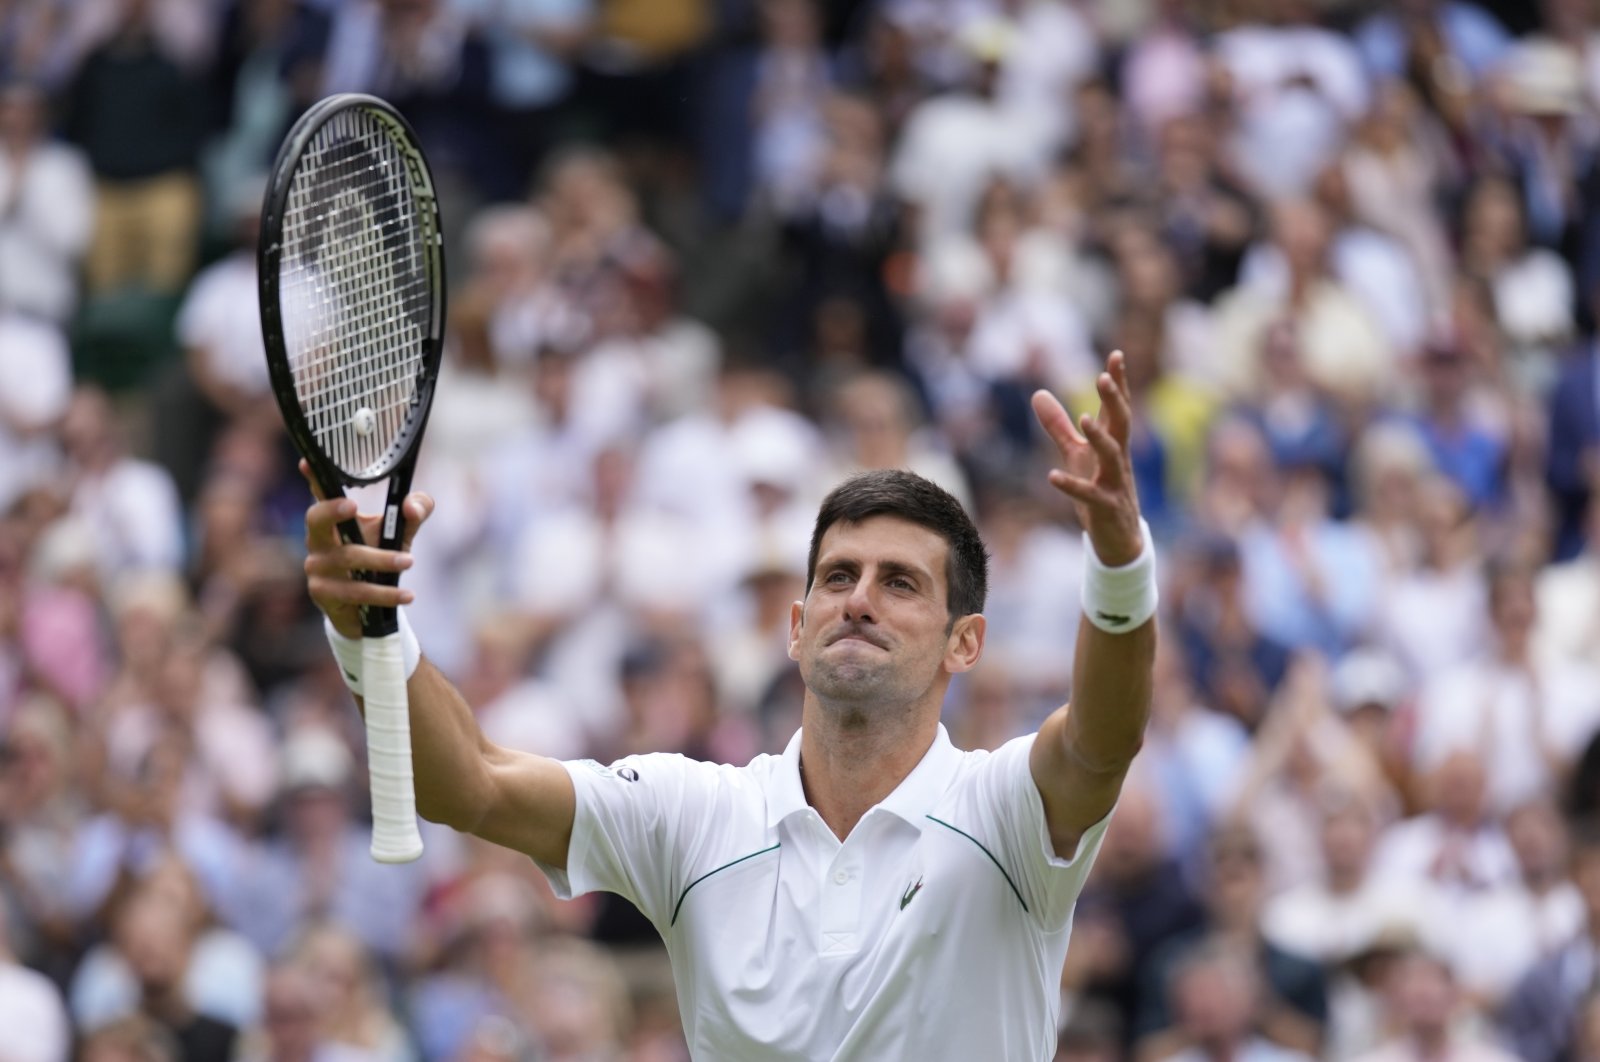 Serbia's Novak Djokovic celebrates after defeating Chile's Cristian Garin in the Wimbledon men's singles fourth round match in London, England, July 5, 2021. (AP Photo)